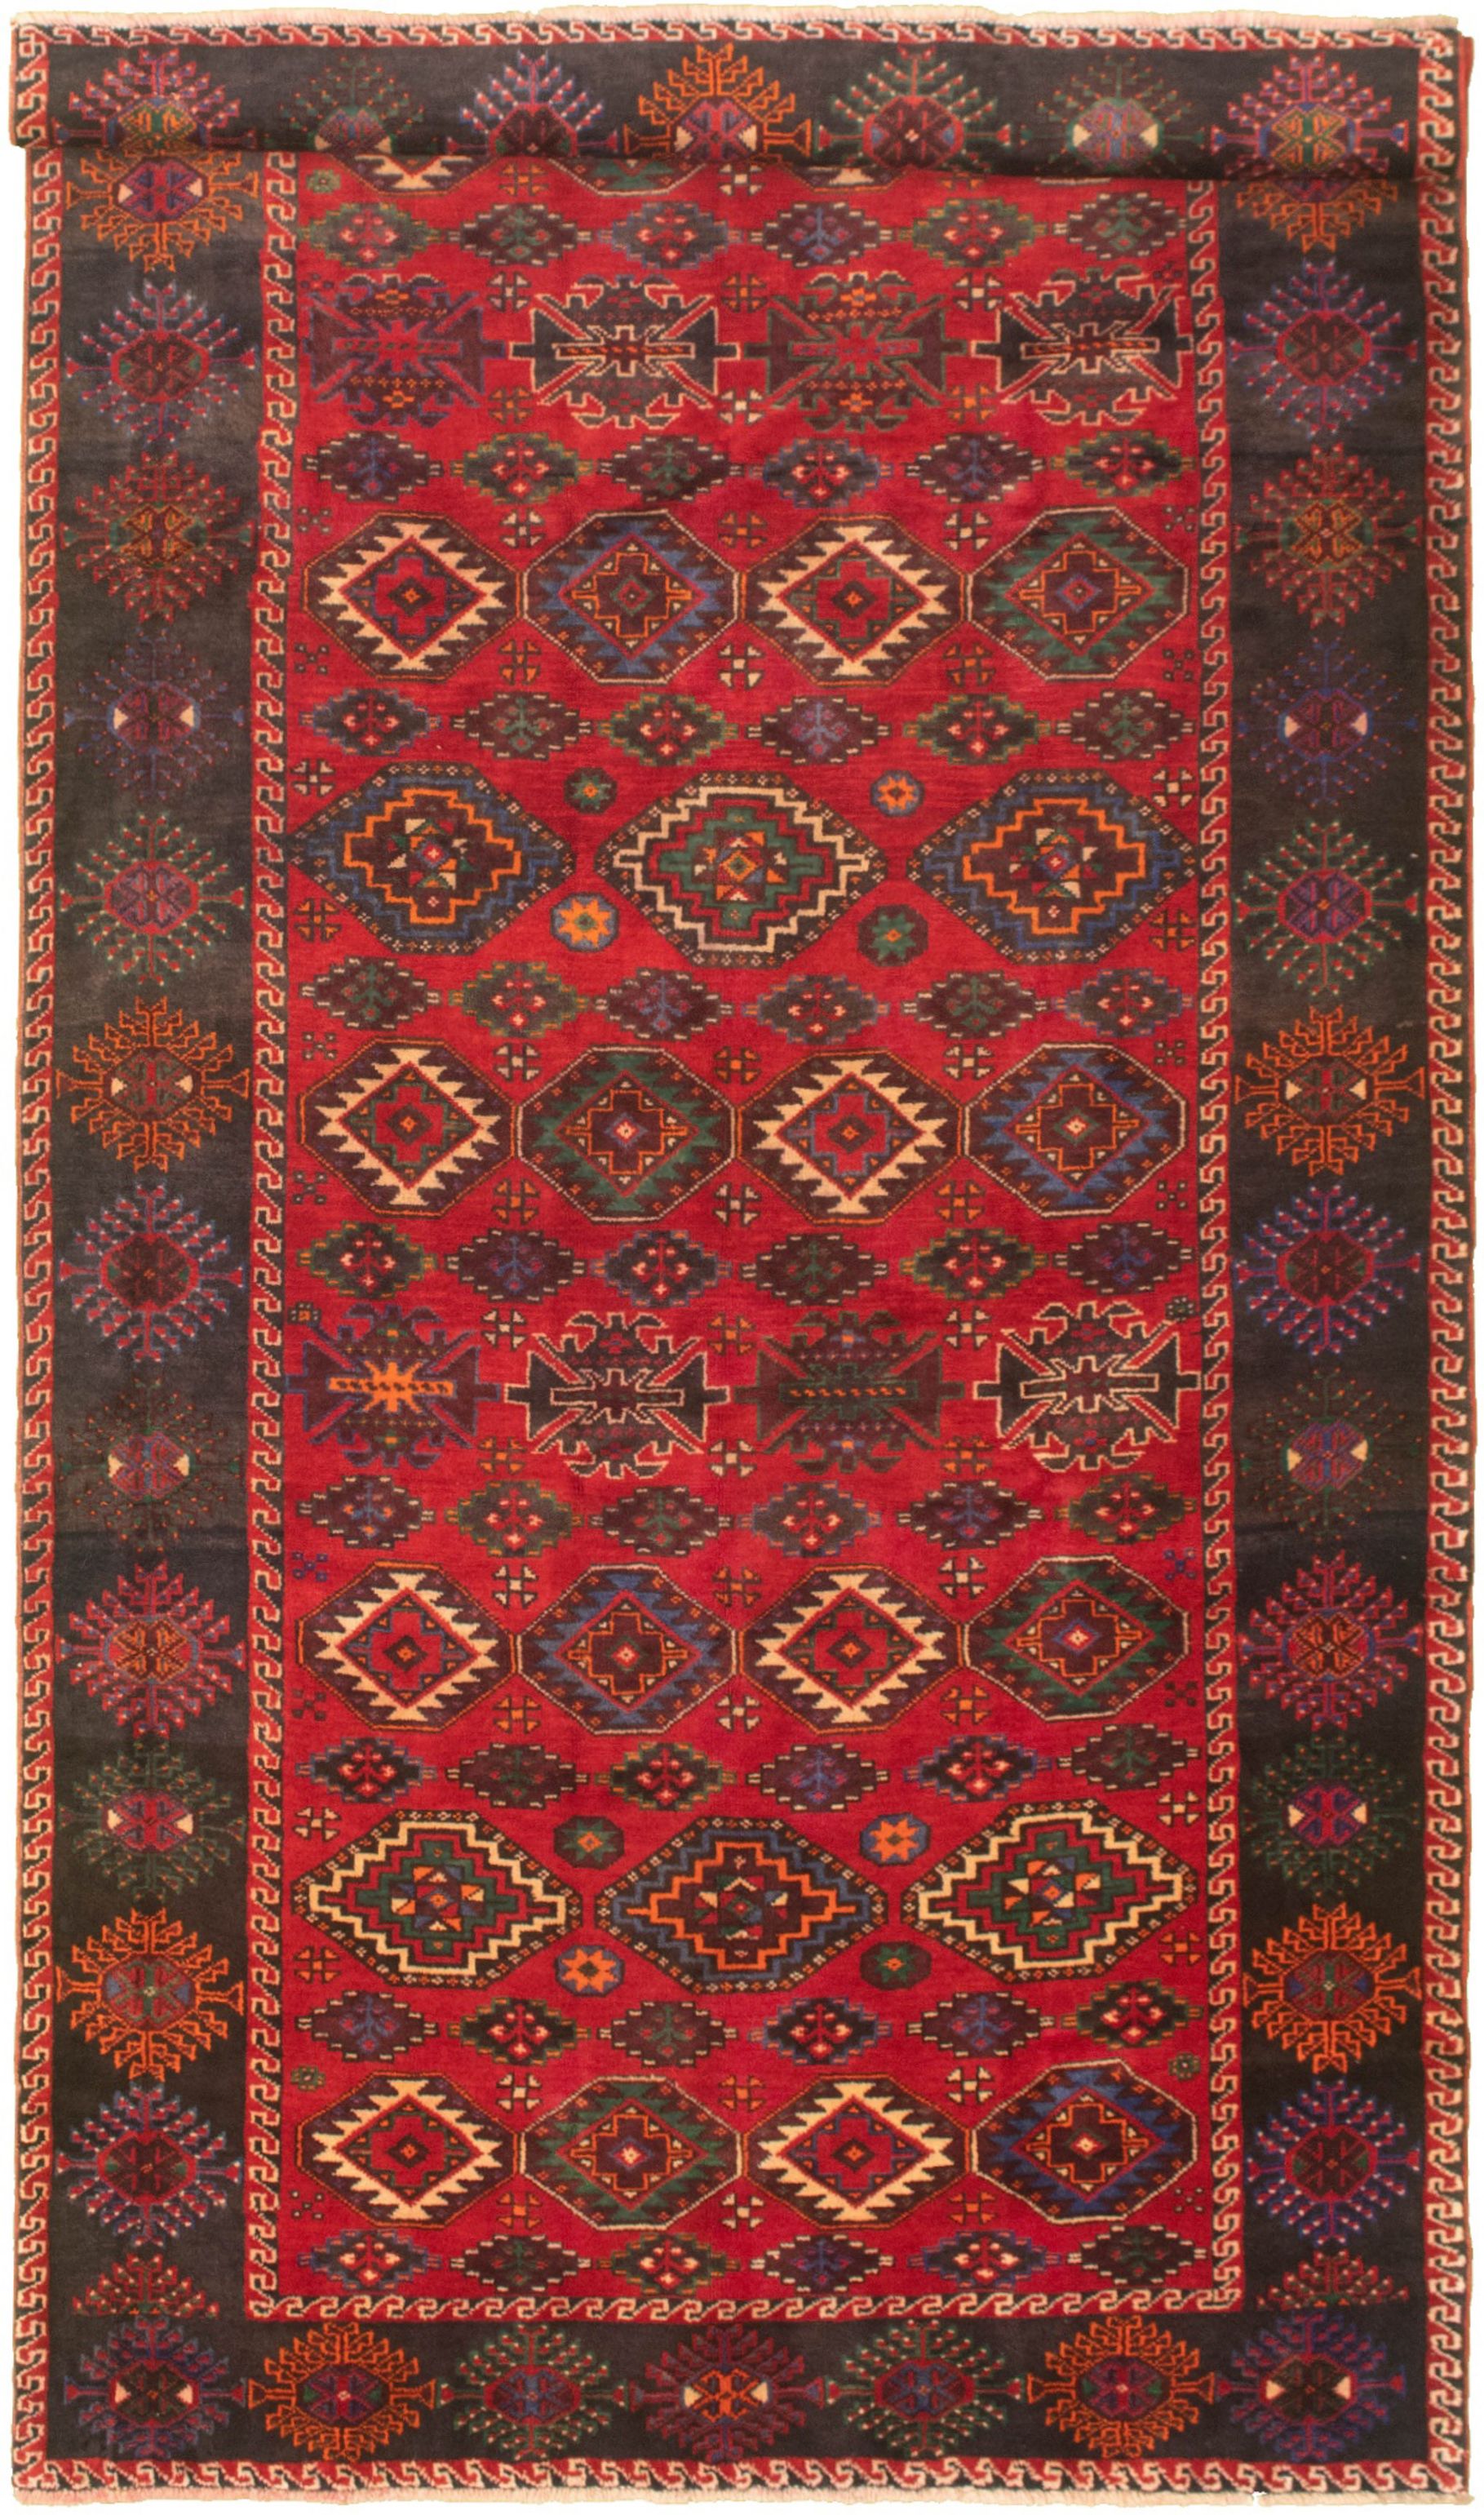 Hand-knotted Authentic Turkish Red Wool Rug 5'3" x 10'3" Size: 5'3" x 10'3"  